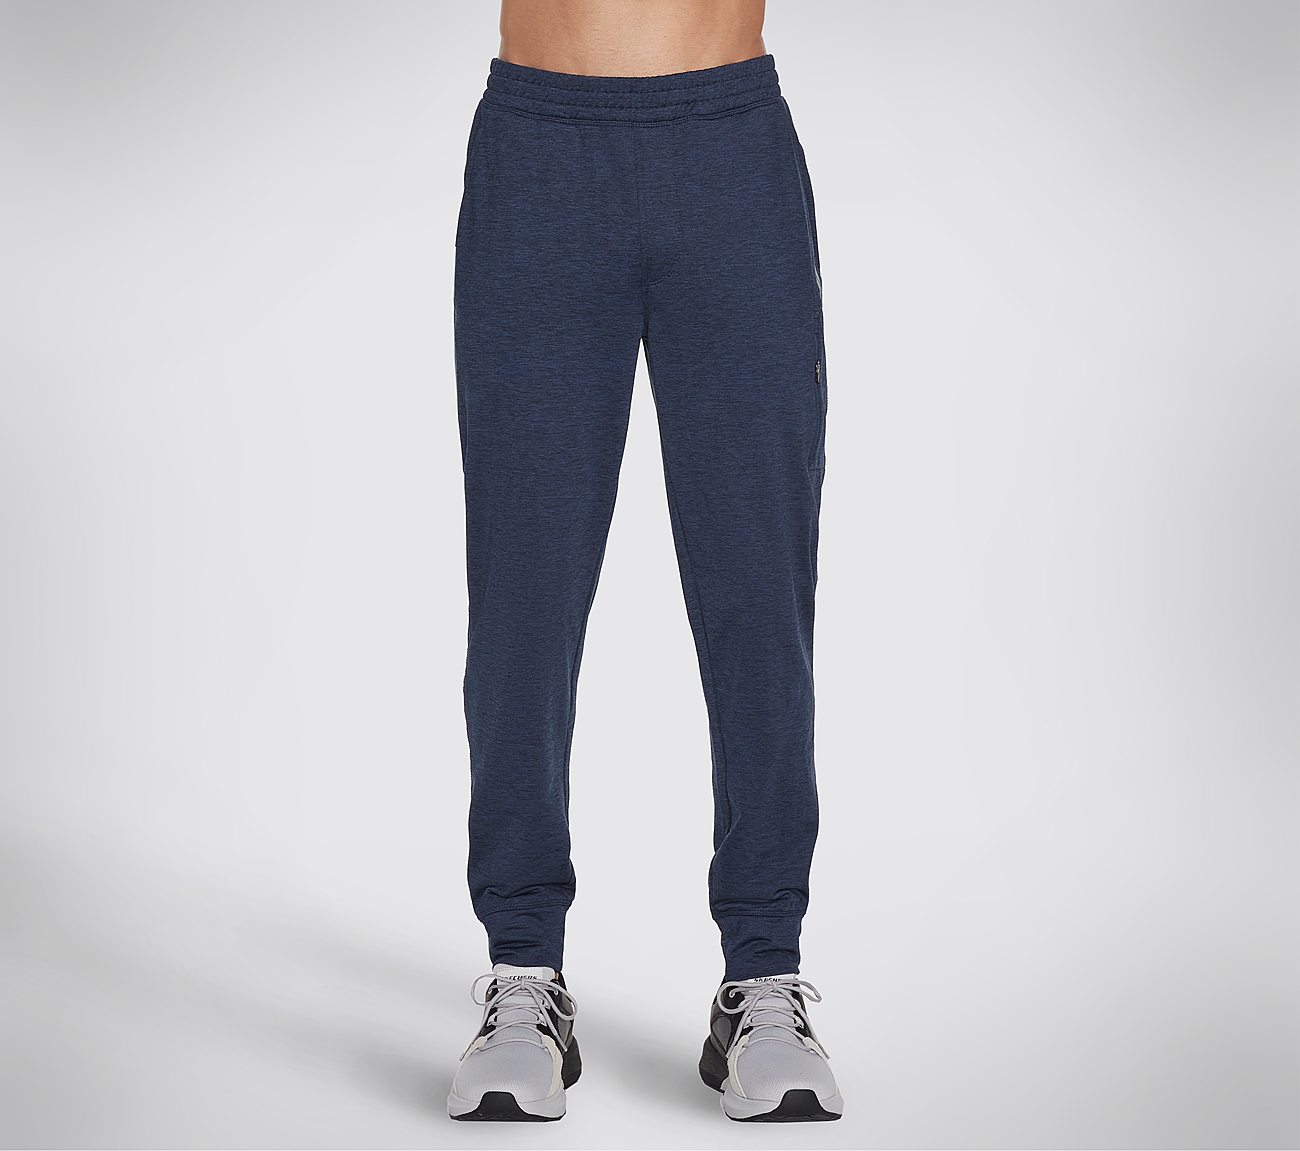 SKECH-KNITS ULTRA GO JOGGER, NNNAVY Apparels Lateral View